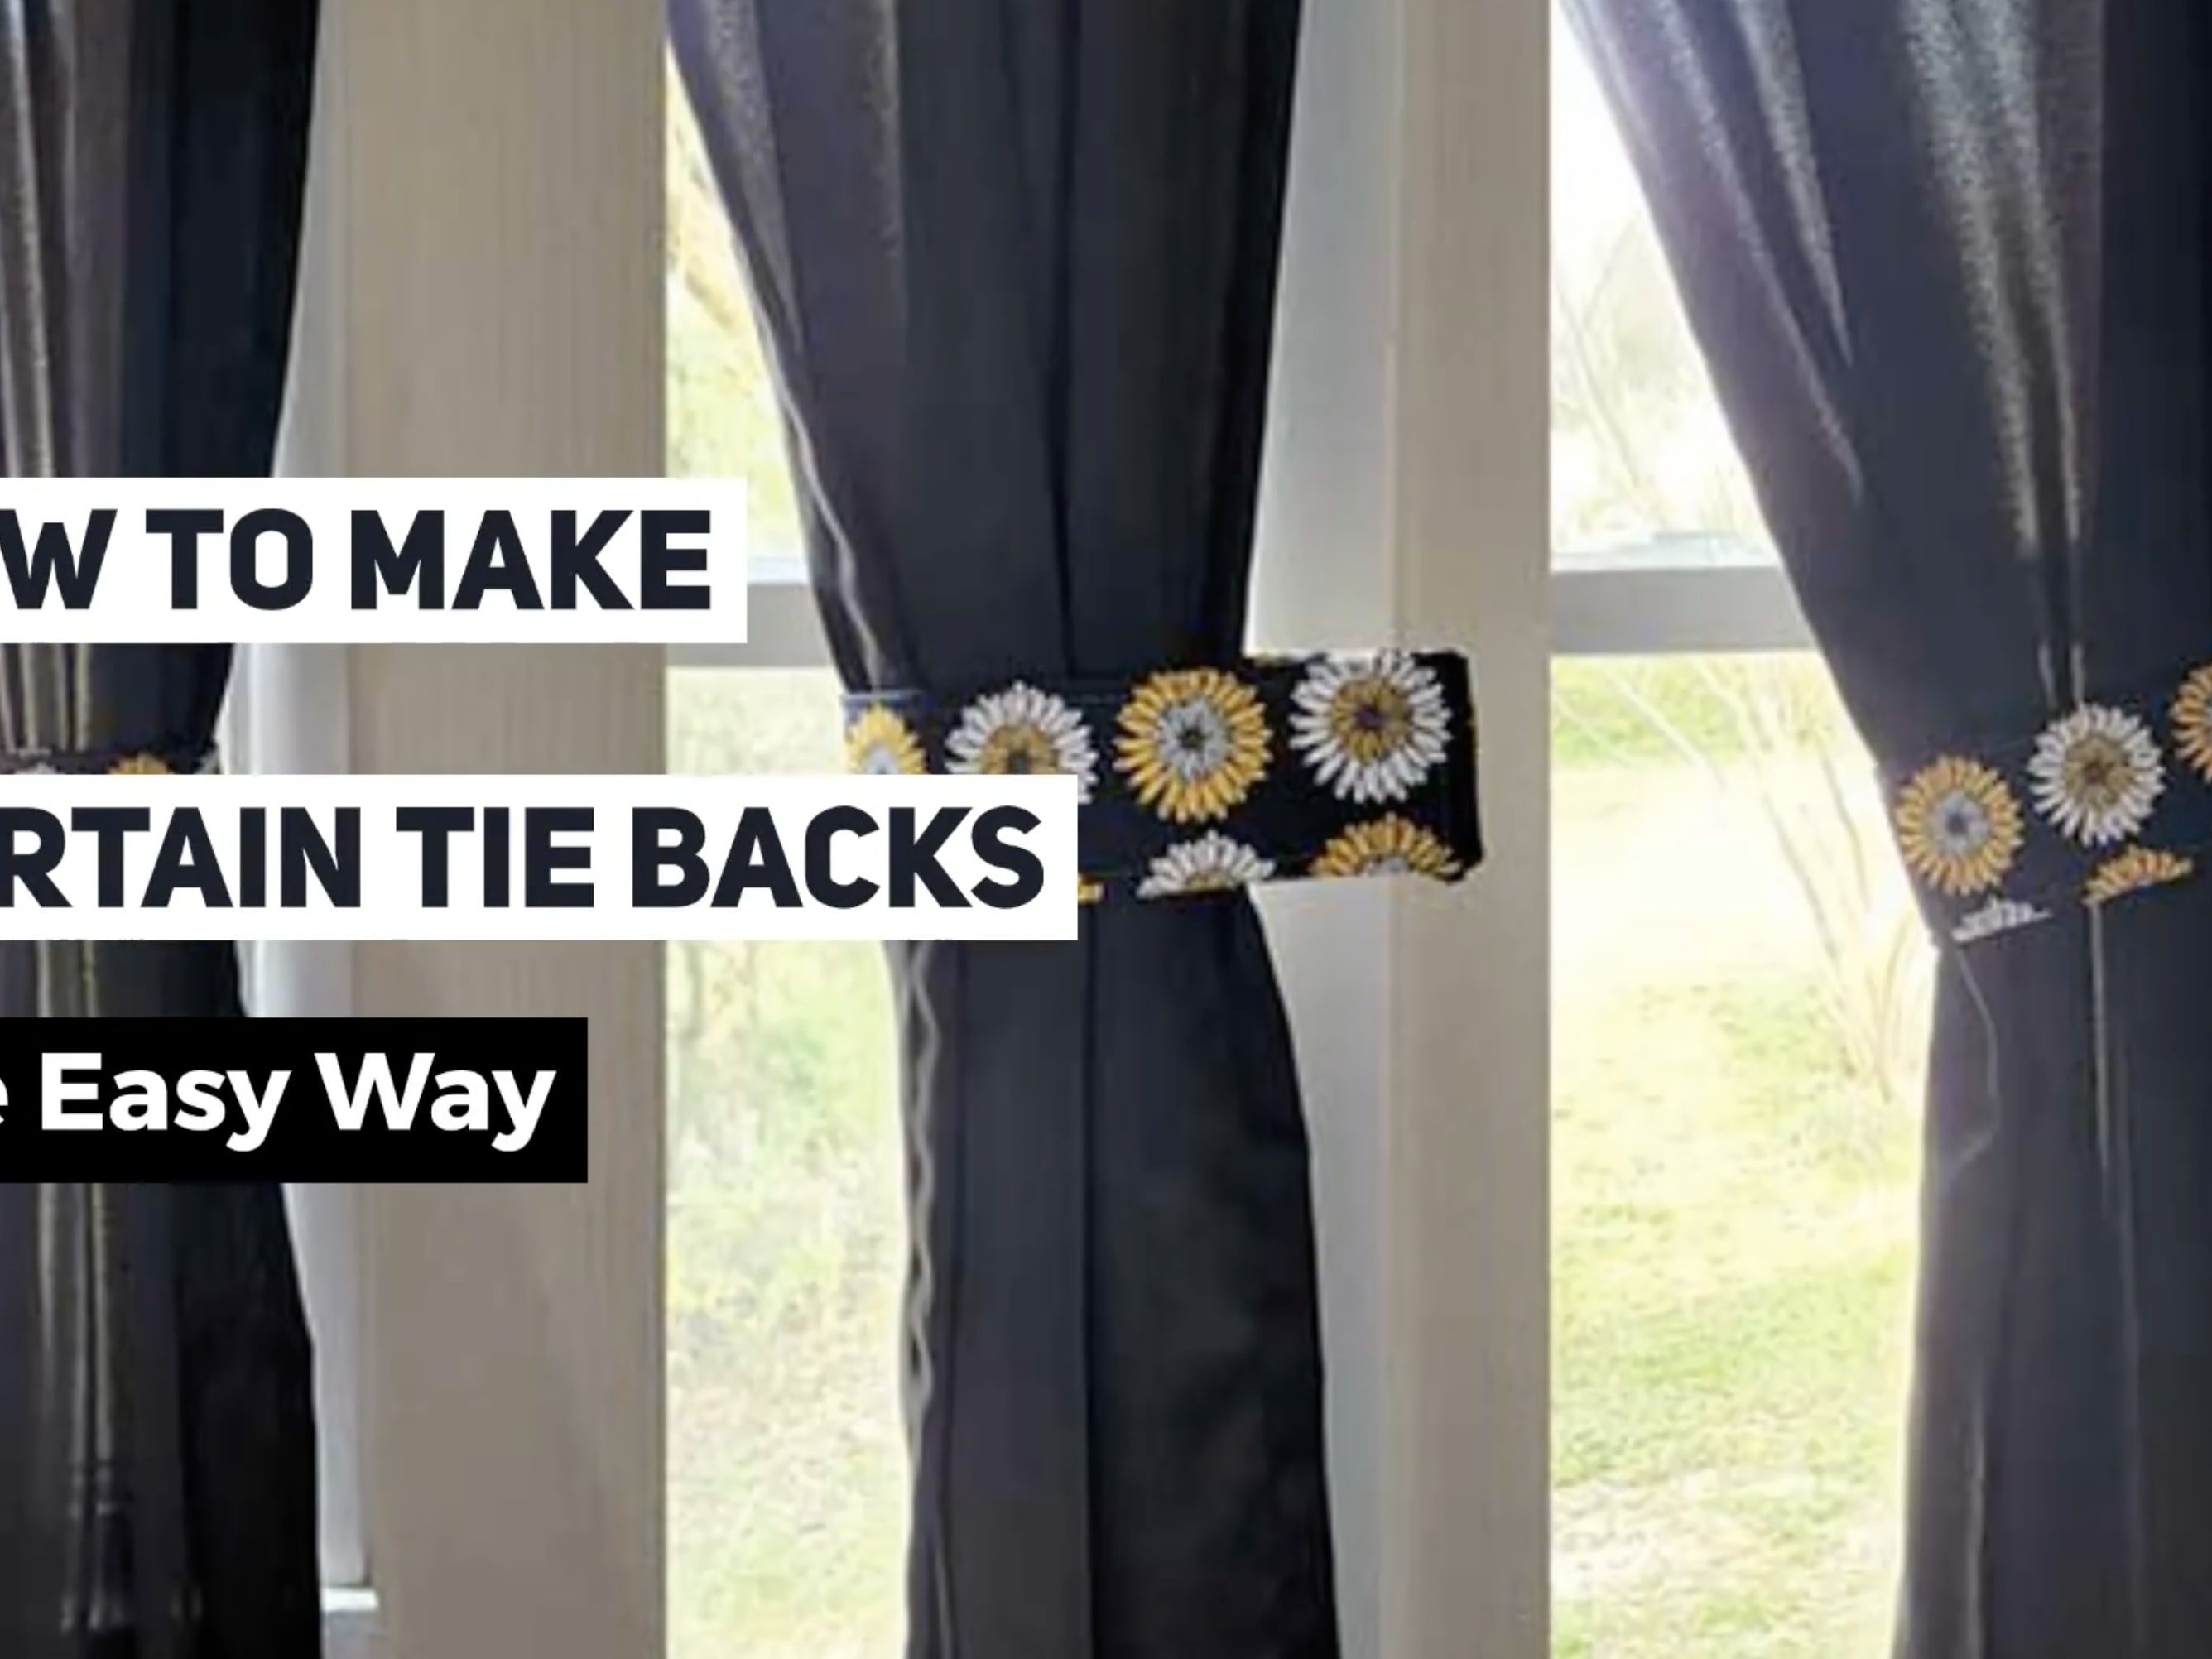 How To Make Curtain Tie Backs The Easy Way!